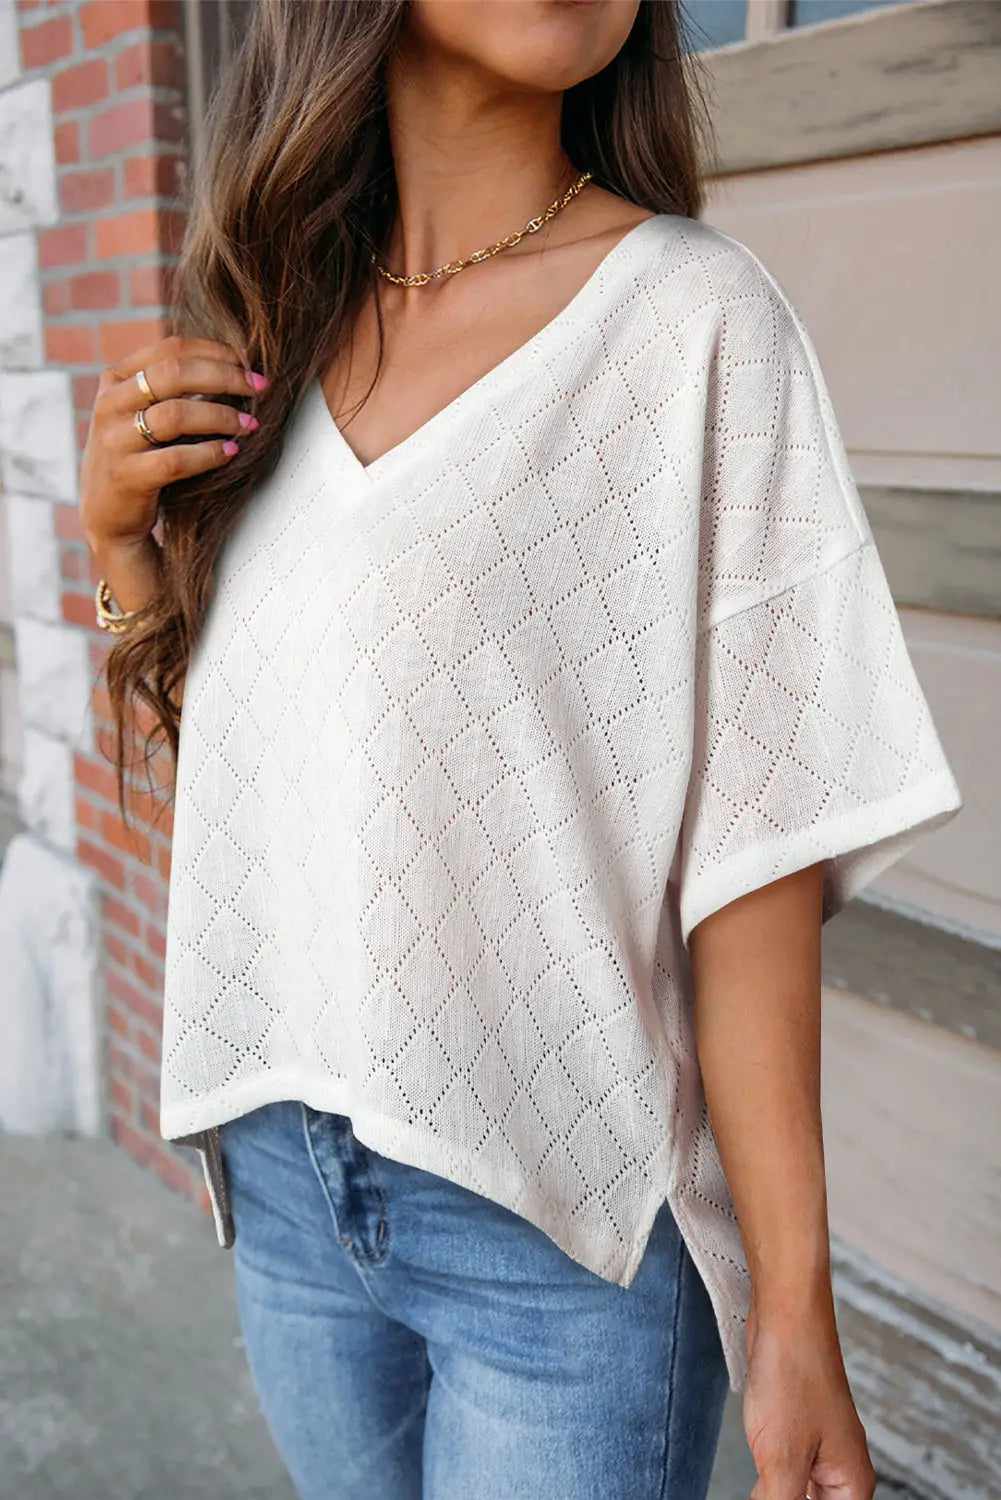 White v neck knitted flowy blouse - blouses & shirts